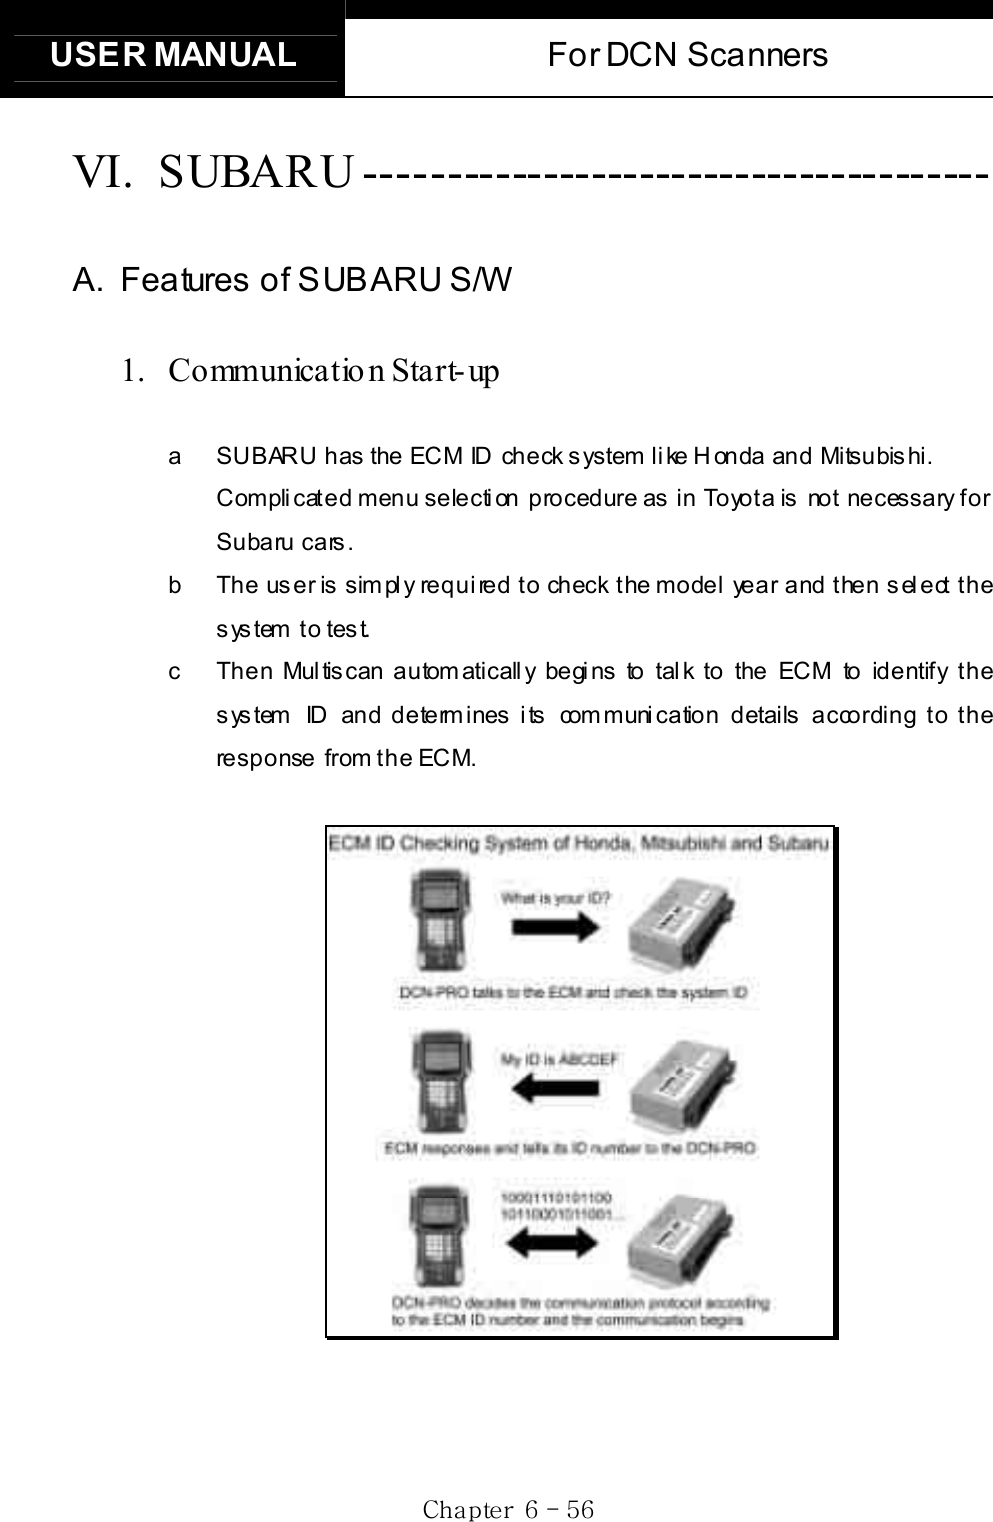 USER MANUAL  For DCN Scanners Gj G]G TG\]GVI. SUBARU --------------------------------------- A.  Features of SUBARU S/W 1. Communicatio n Start-up a  SUBARU has the ECM ID check system like Honda and Mitsubishi.   Complicated menu selection  procedure as in  Toyota is  not necessary for Subaru cars.   b  The user is simply required to check the model year and then select the system to test.   c  Then Multiscan automatically begins to talk to the ECM to identify the system ID and determines its communication details according to the response from the ECM. 